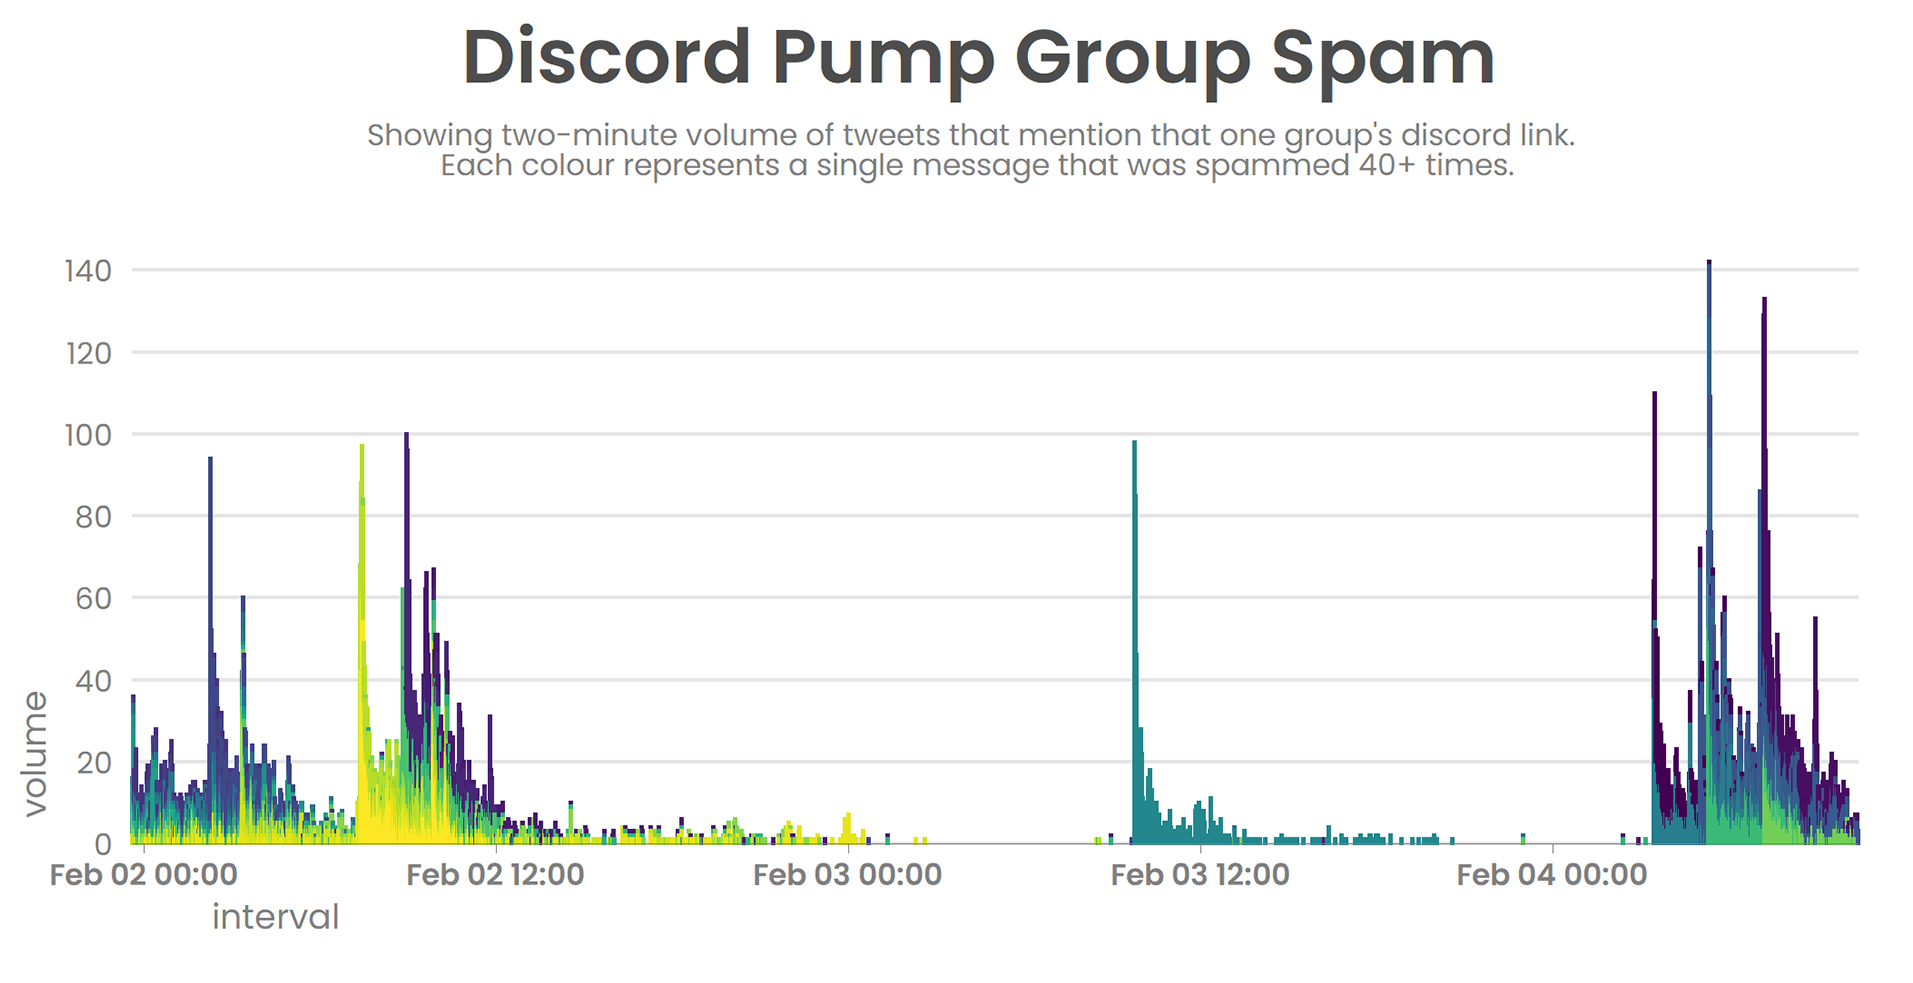 Analyzing Discord ‘Pump Group’ Spam on Twitter With Perfect Foresight